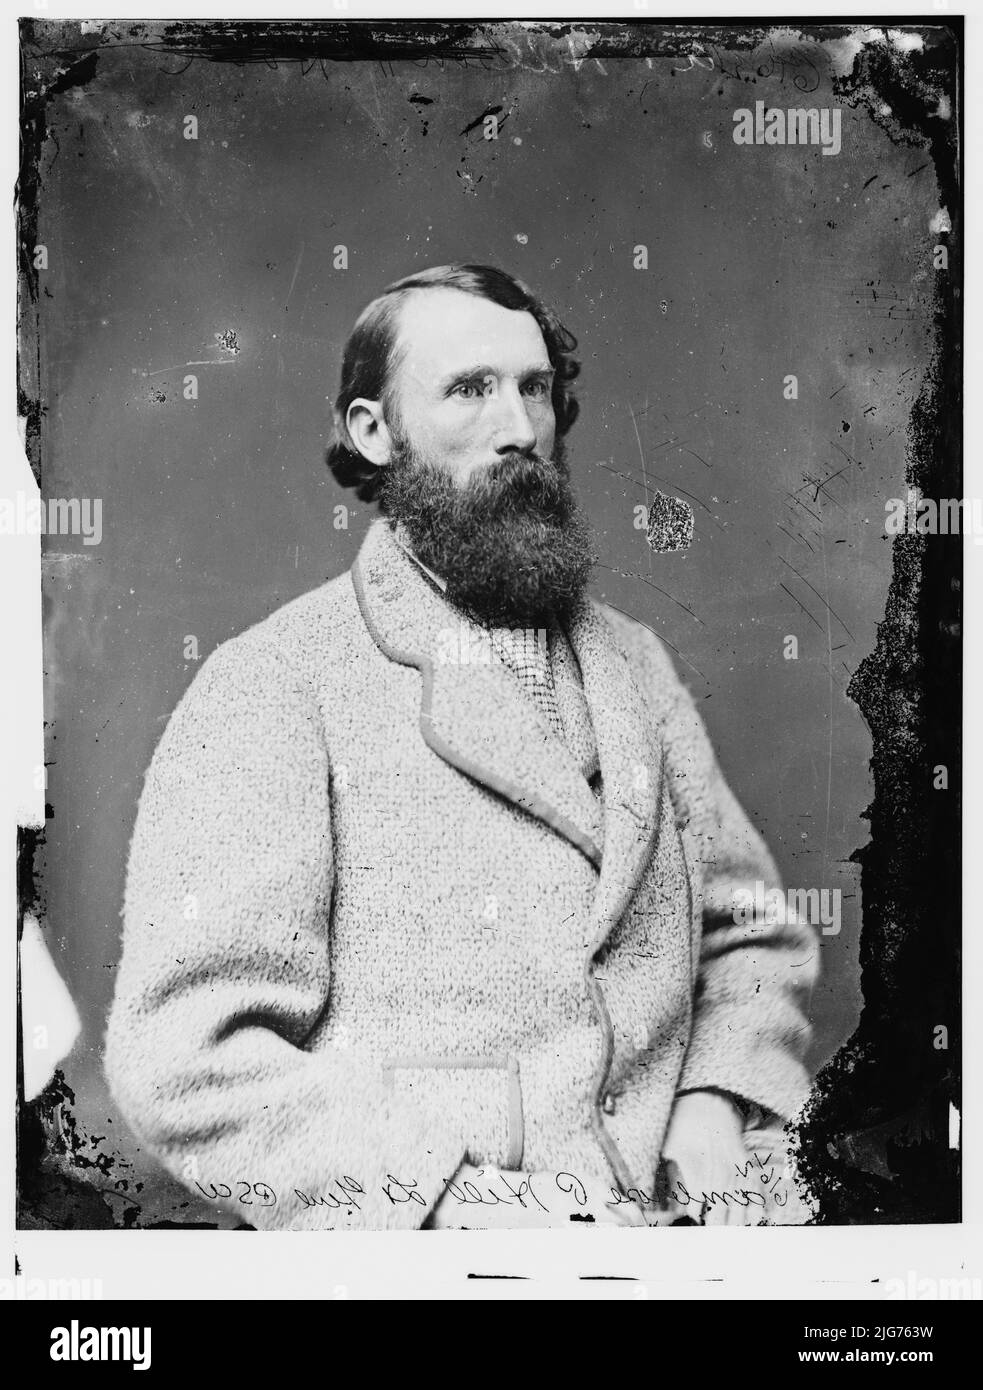 Gen. A.P. Hill, C.S.A, between 1860 and 1865. [Confederate general who was killed in the American Civil War]. Stock Photo